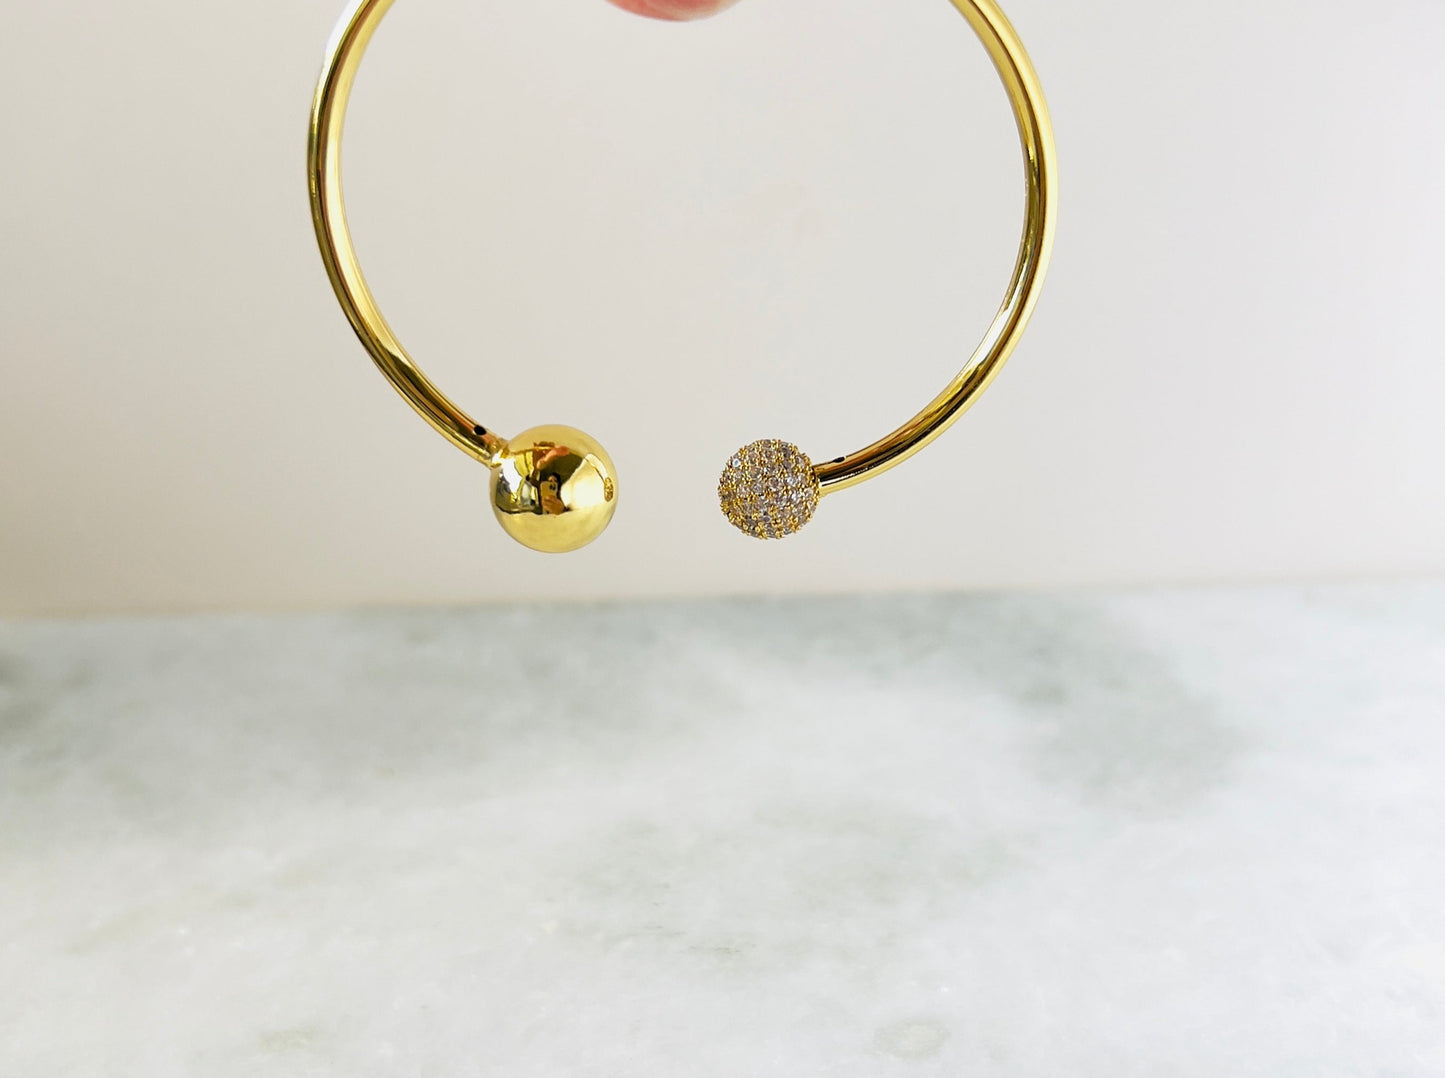 Chic gold-plated bangle bracelet with contrasting ball ends, where one end is a solid gold ball and the other is covered in cubic zirconia. This stylish bangle offers a unique and glamorous accessory for any occasion